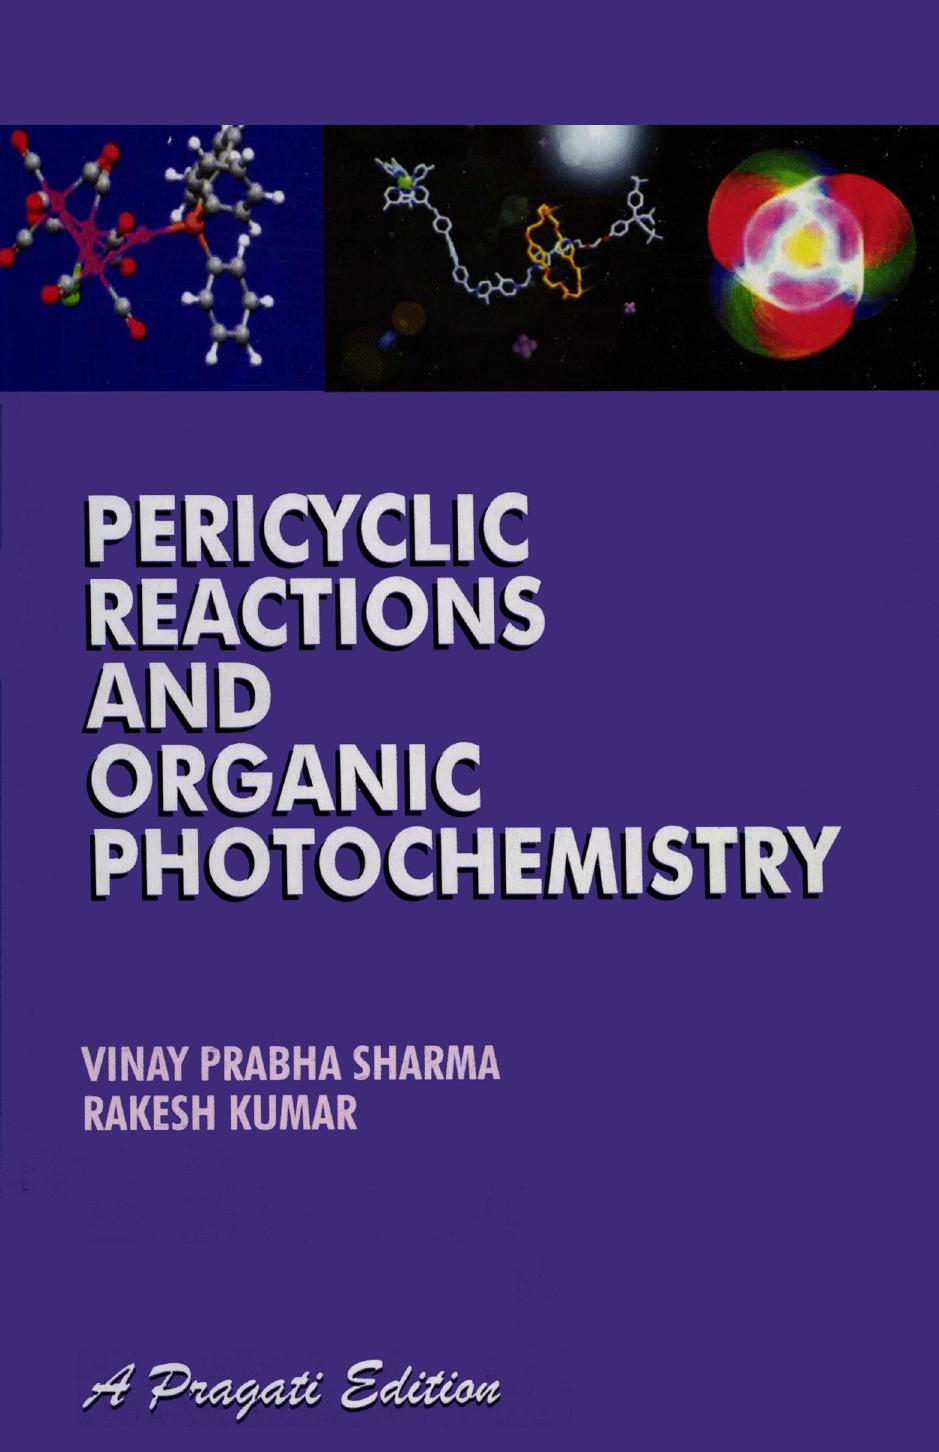 Pericyclic Reactions and Organic Photochemistry